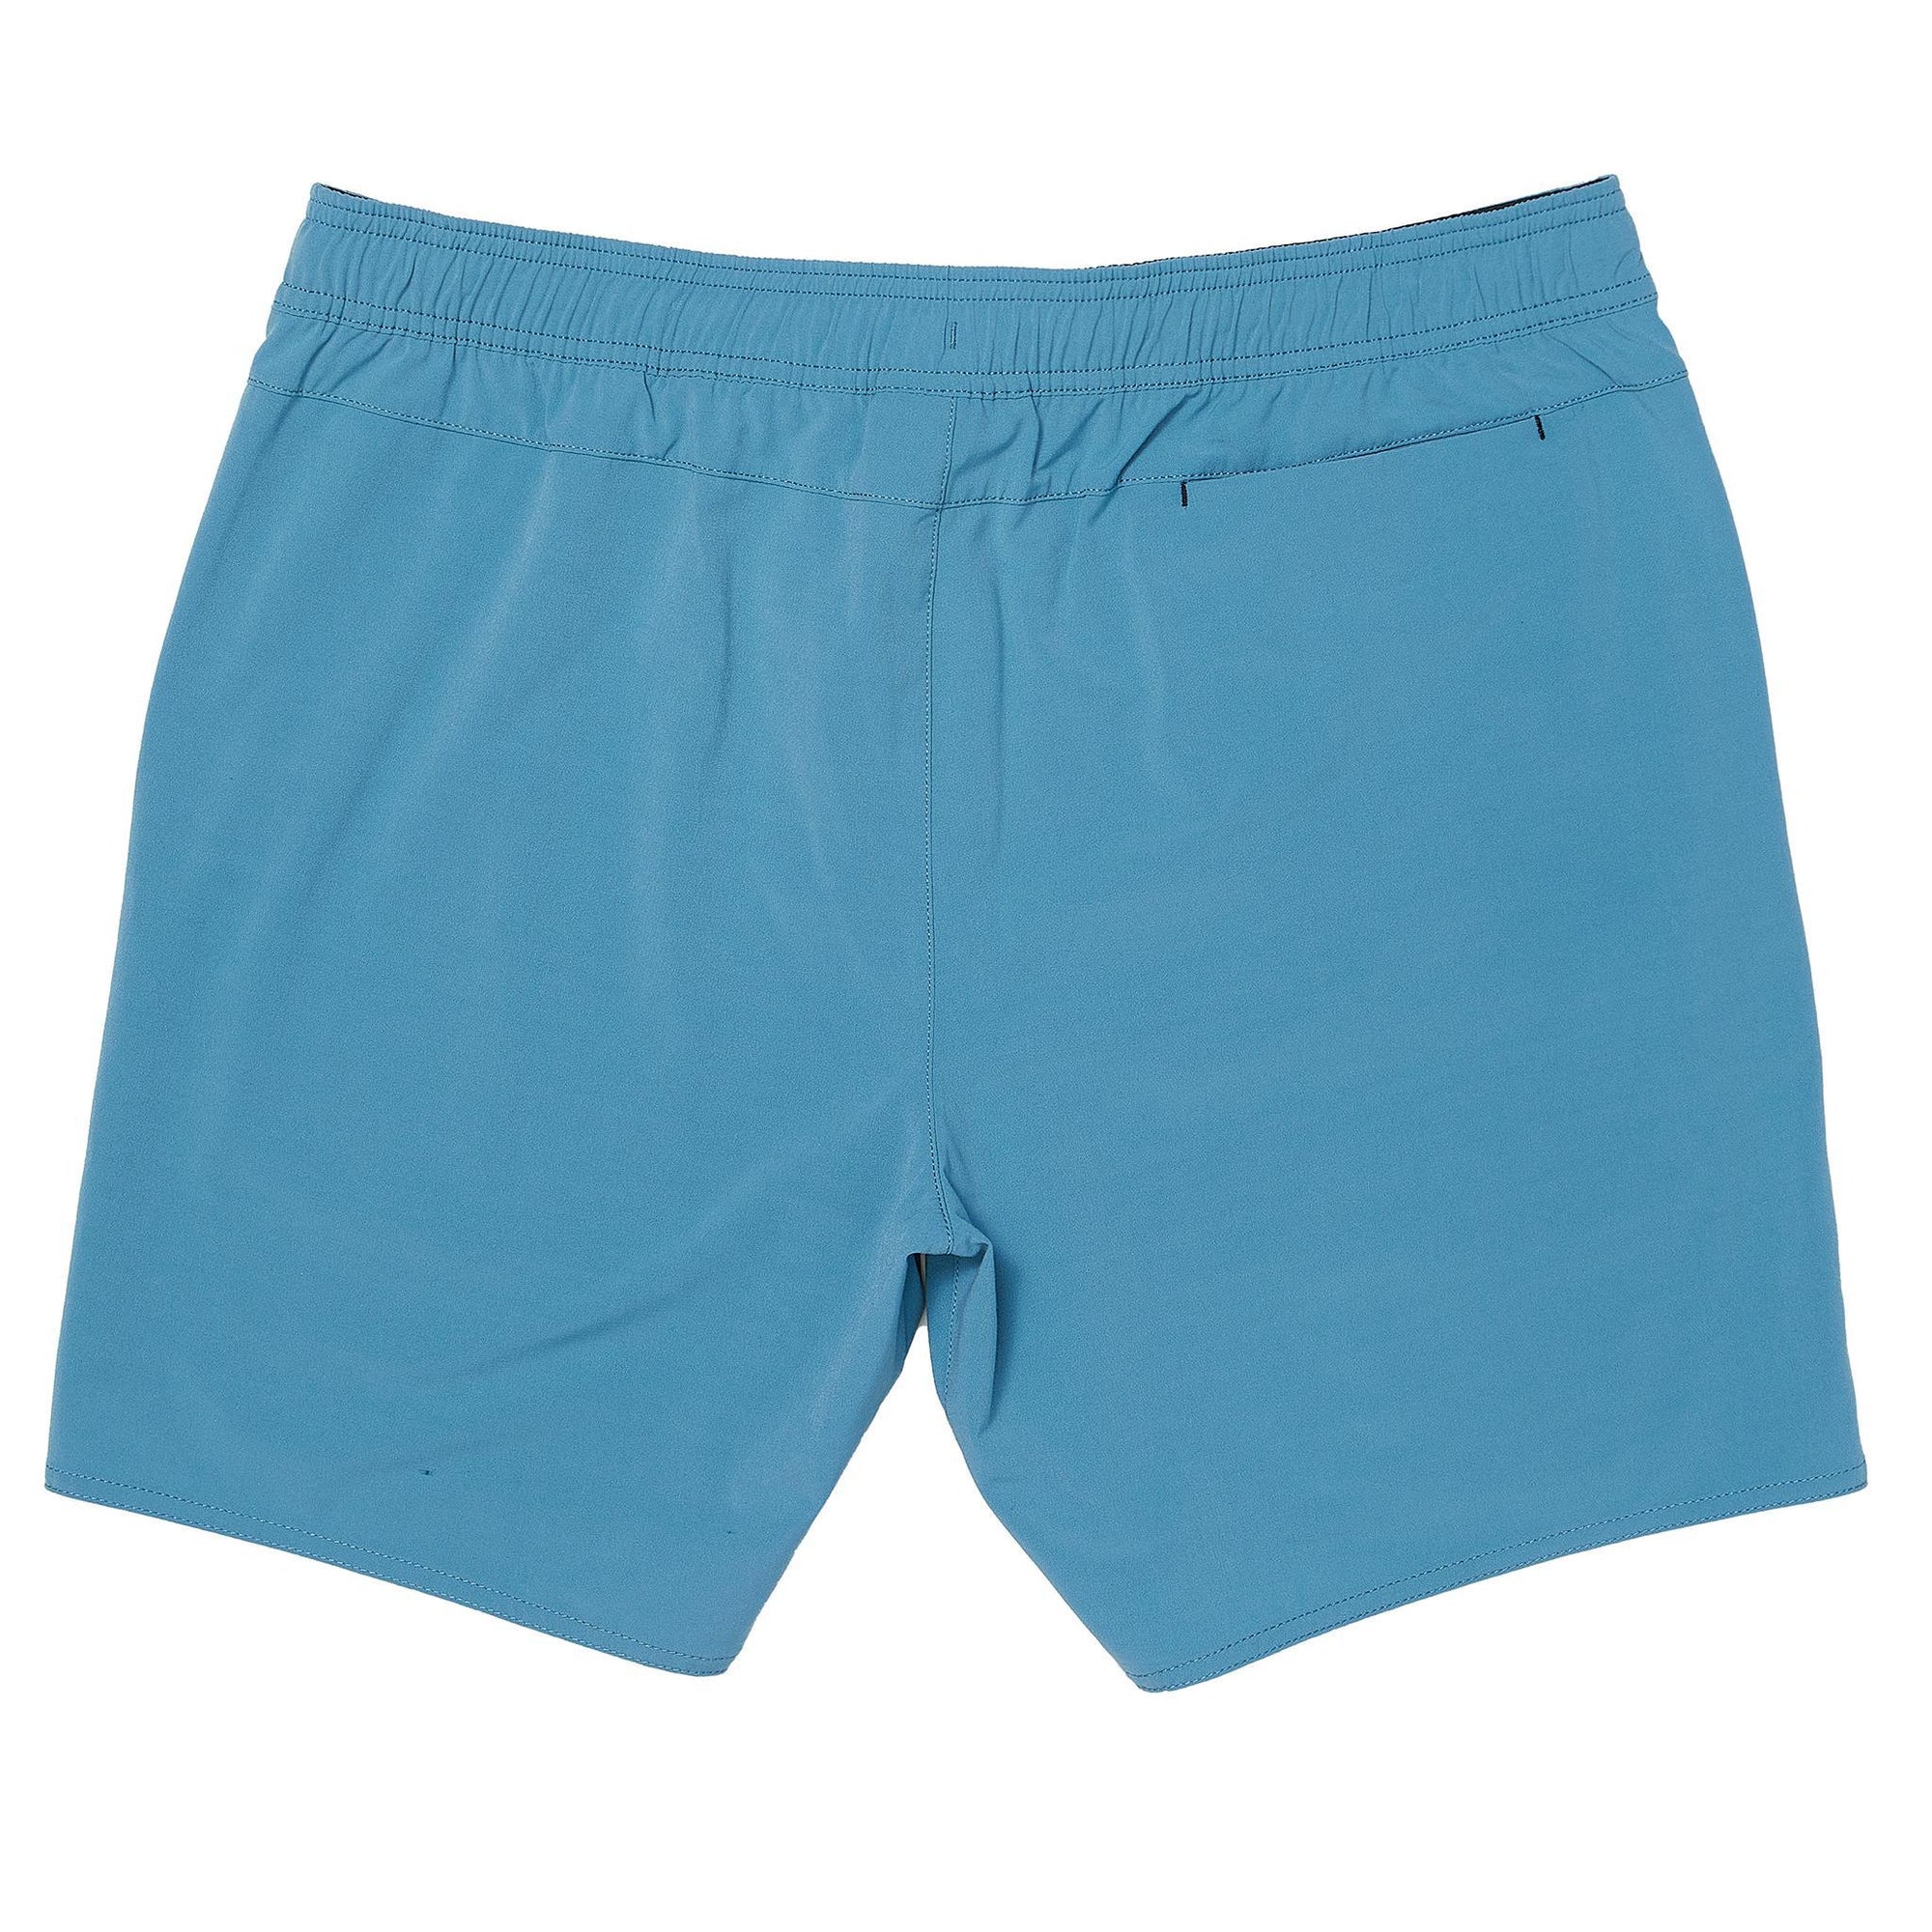 Front of solid light blue lightweight boardshorts with elastic waistband.